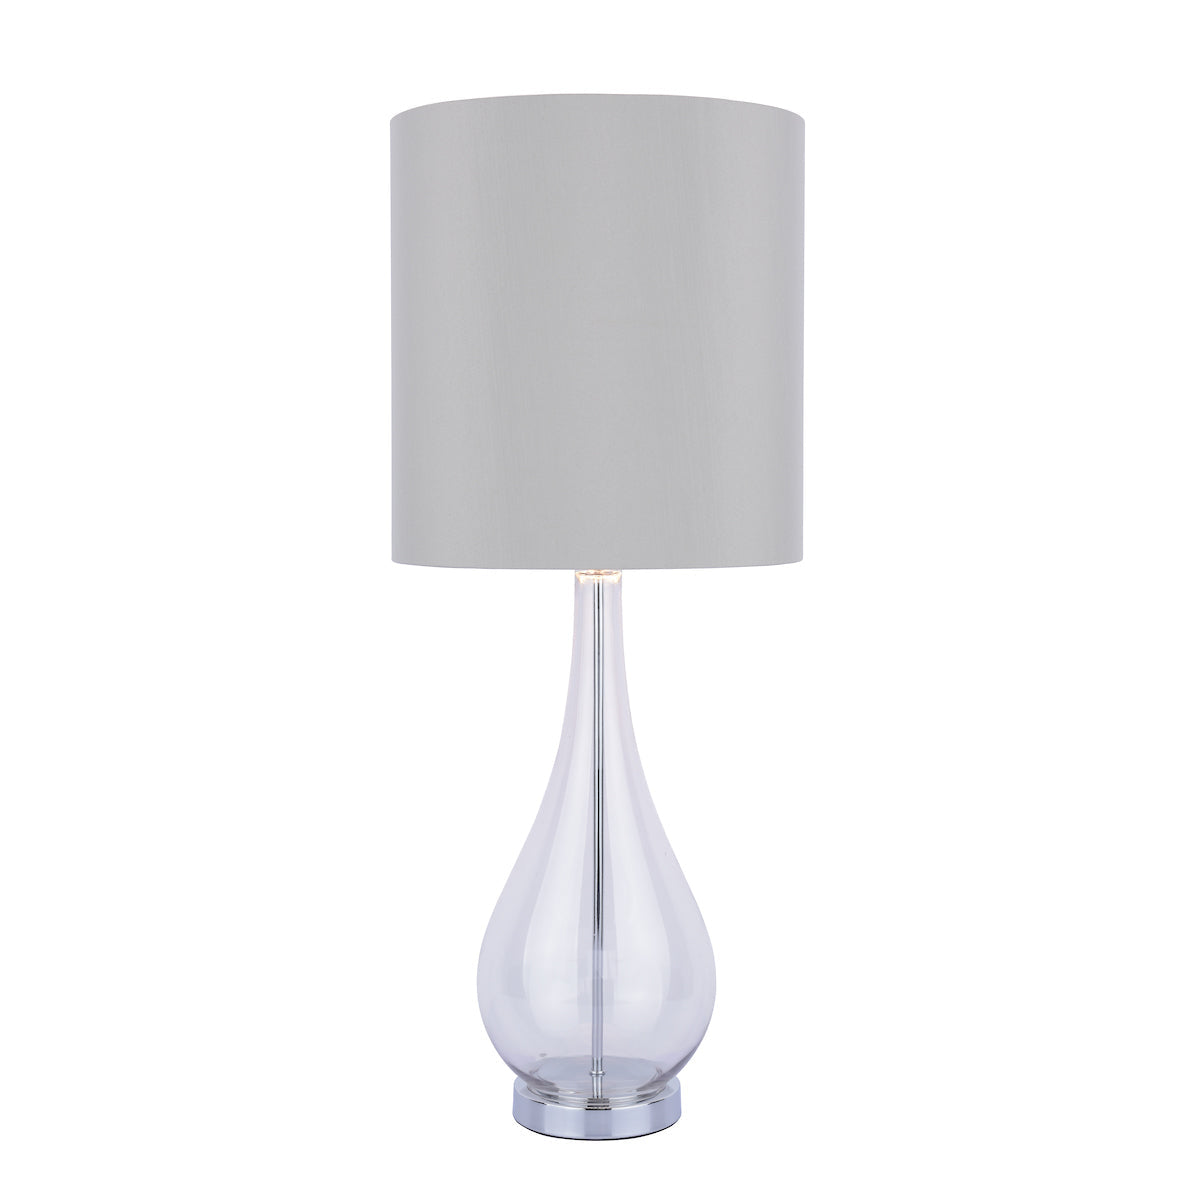 Laura Ashley Bronant Table Lamp Smoked Glass with Shade